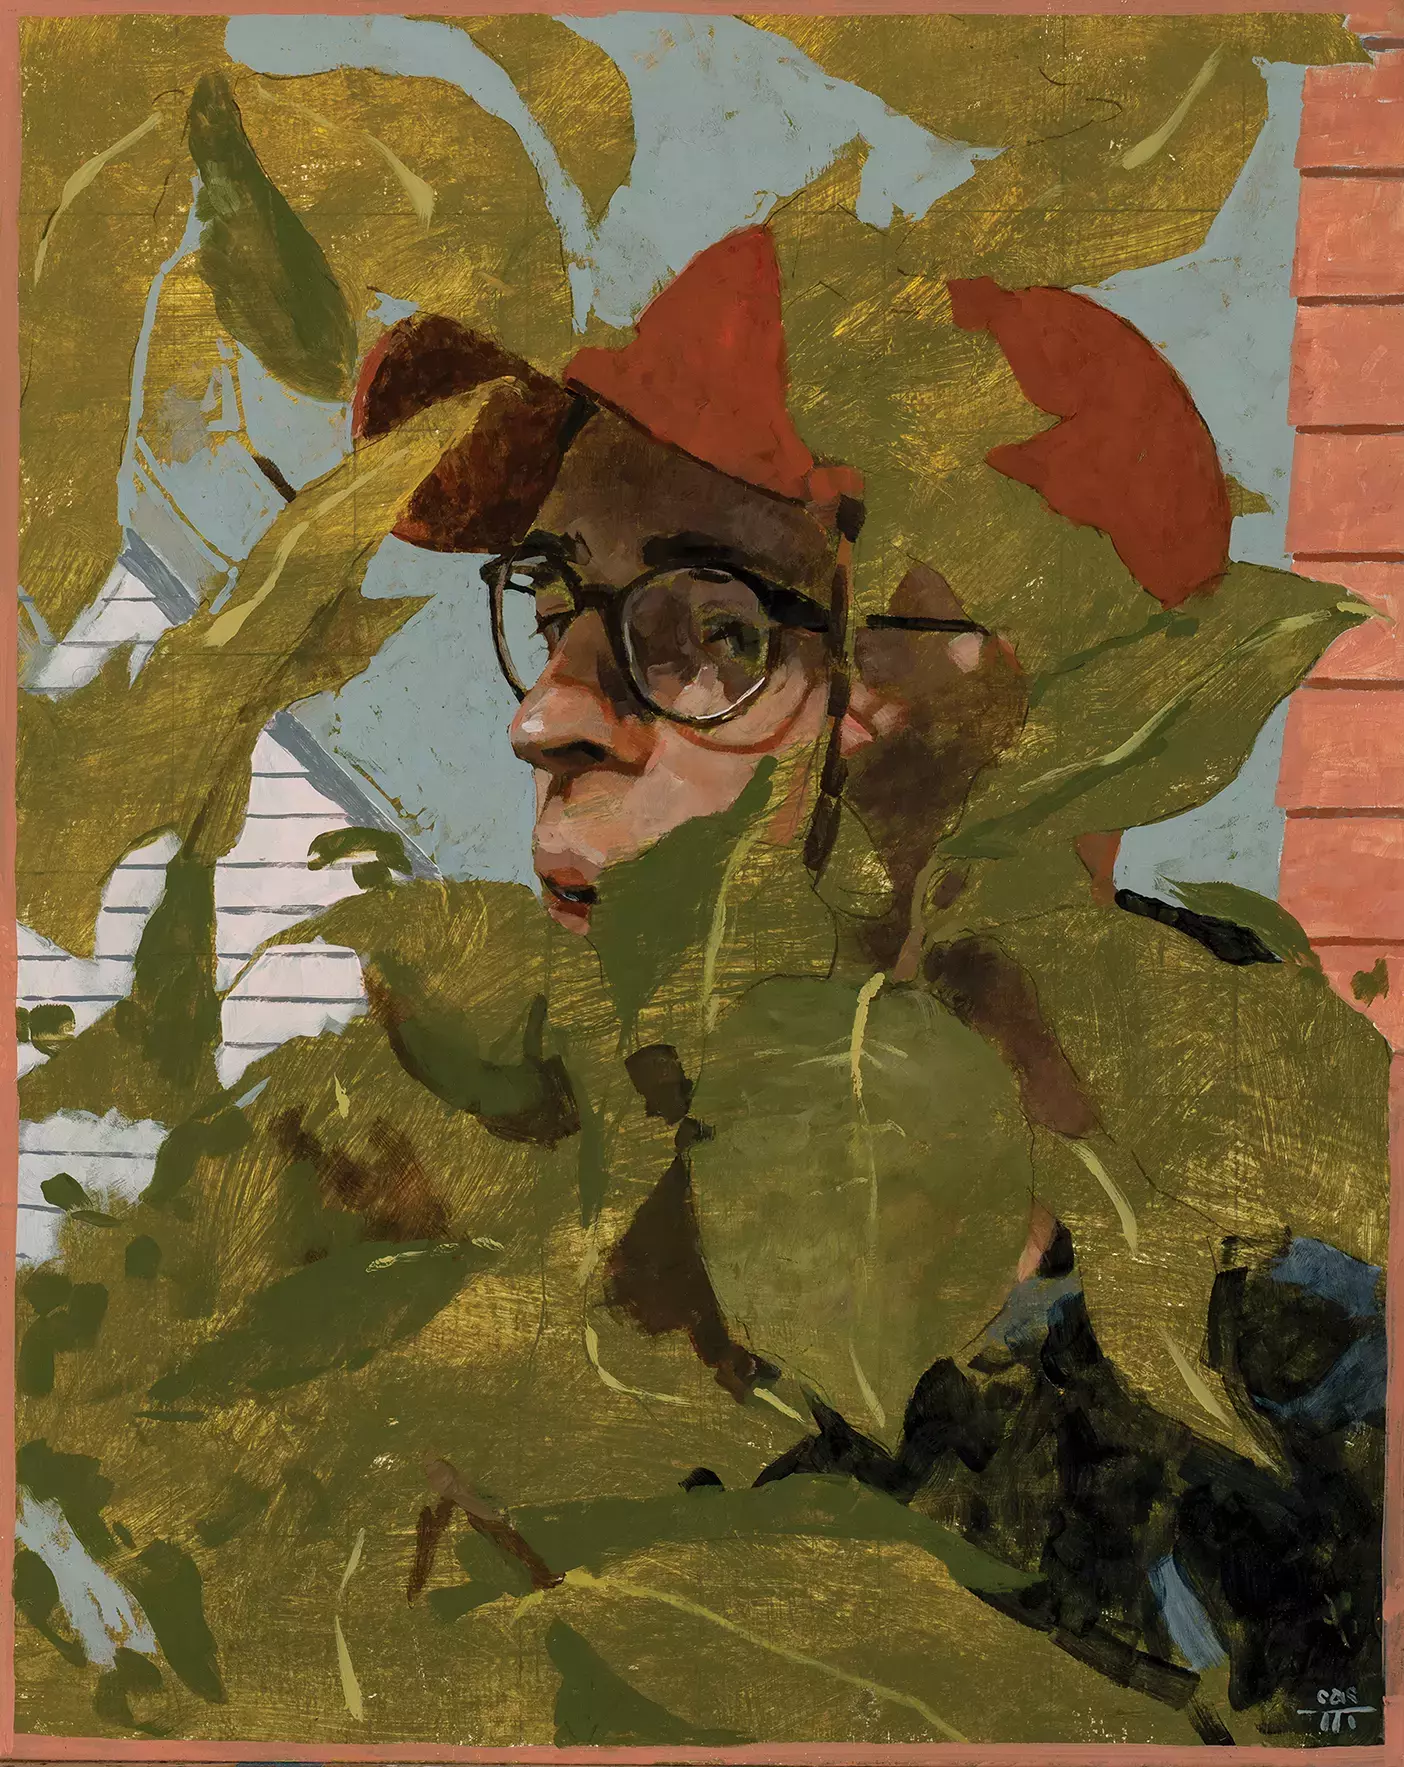 A painting by Colby A. Stanford of a man wearing glasses behind a tree.